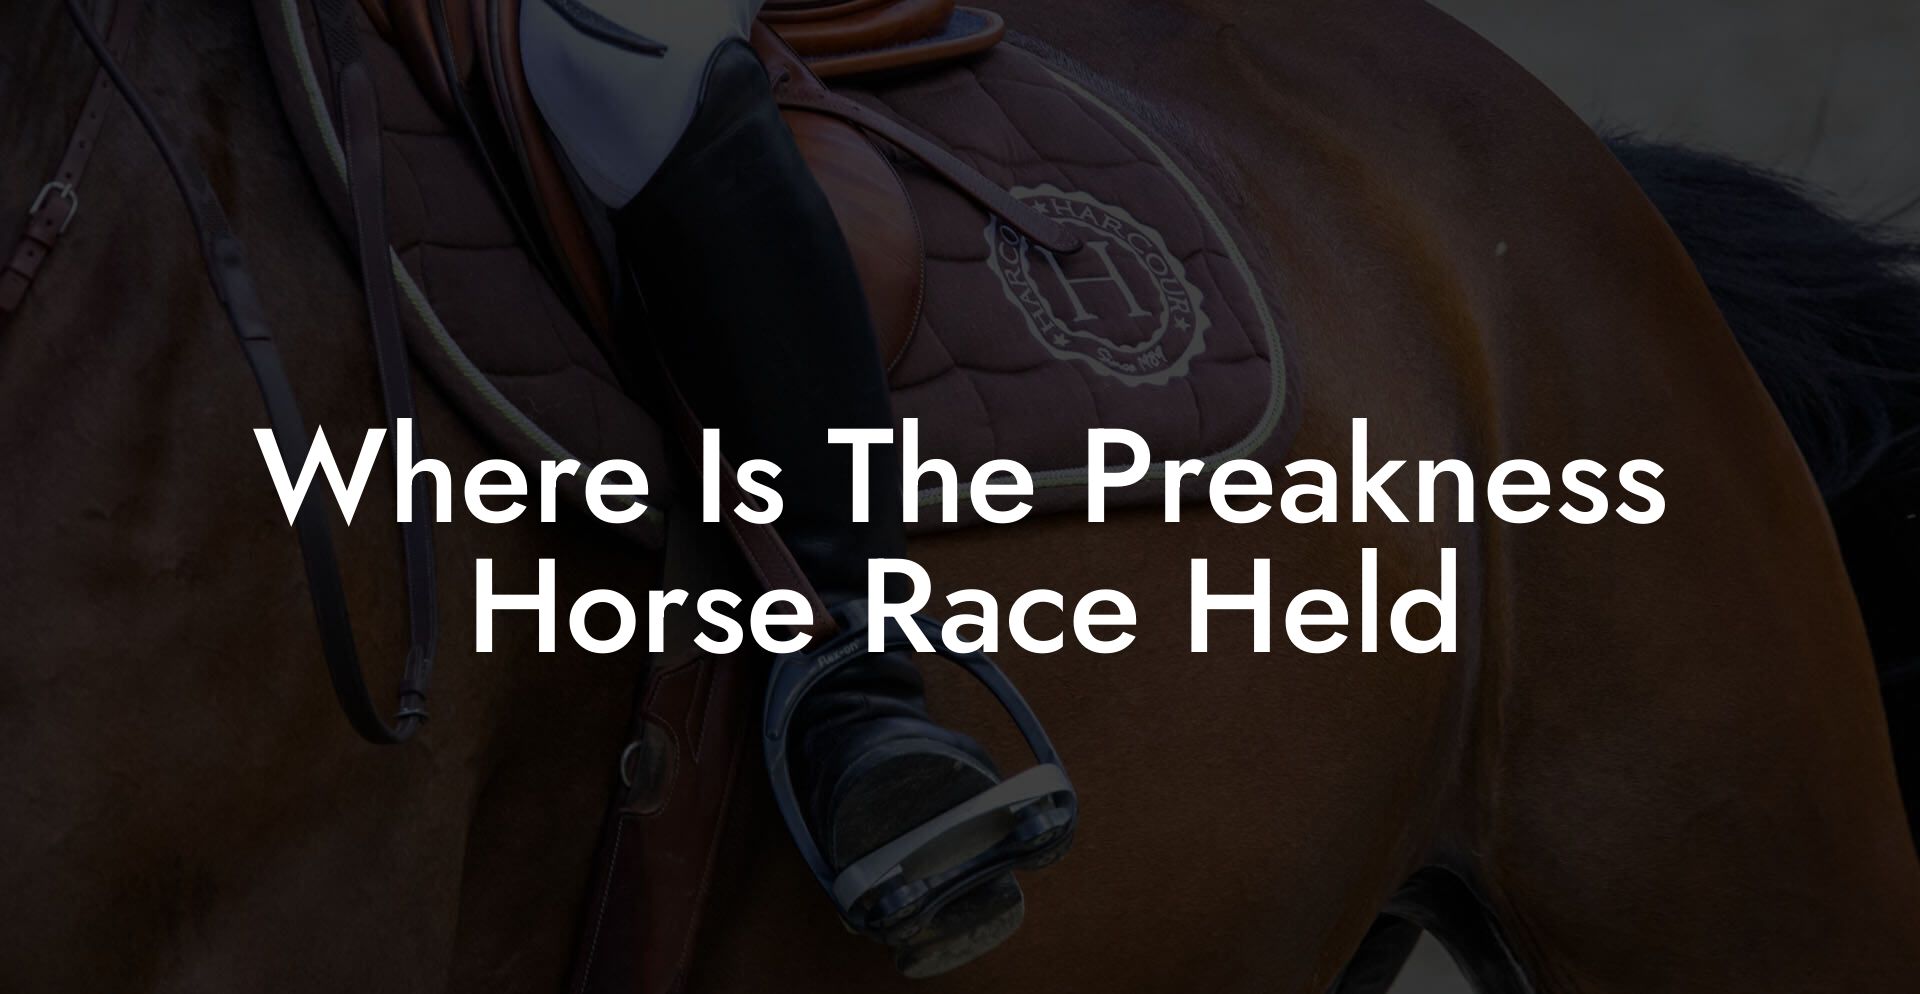 Where Is The Preakness Horse Race Held